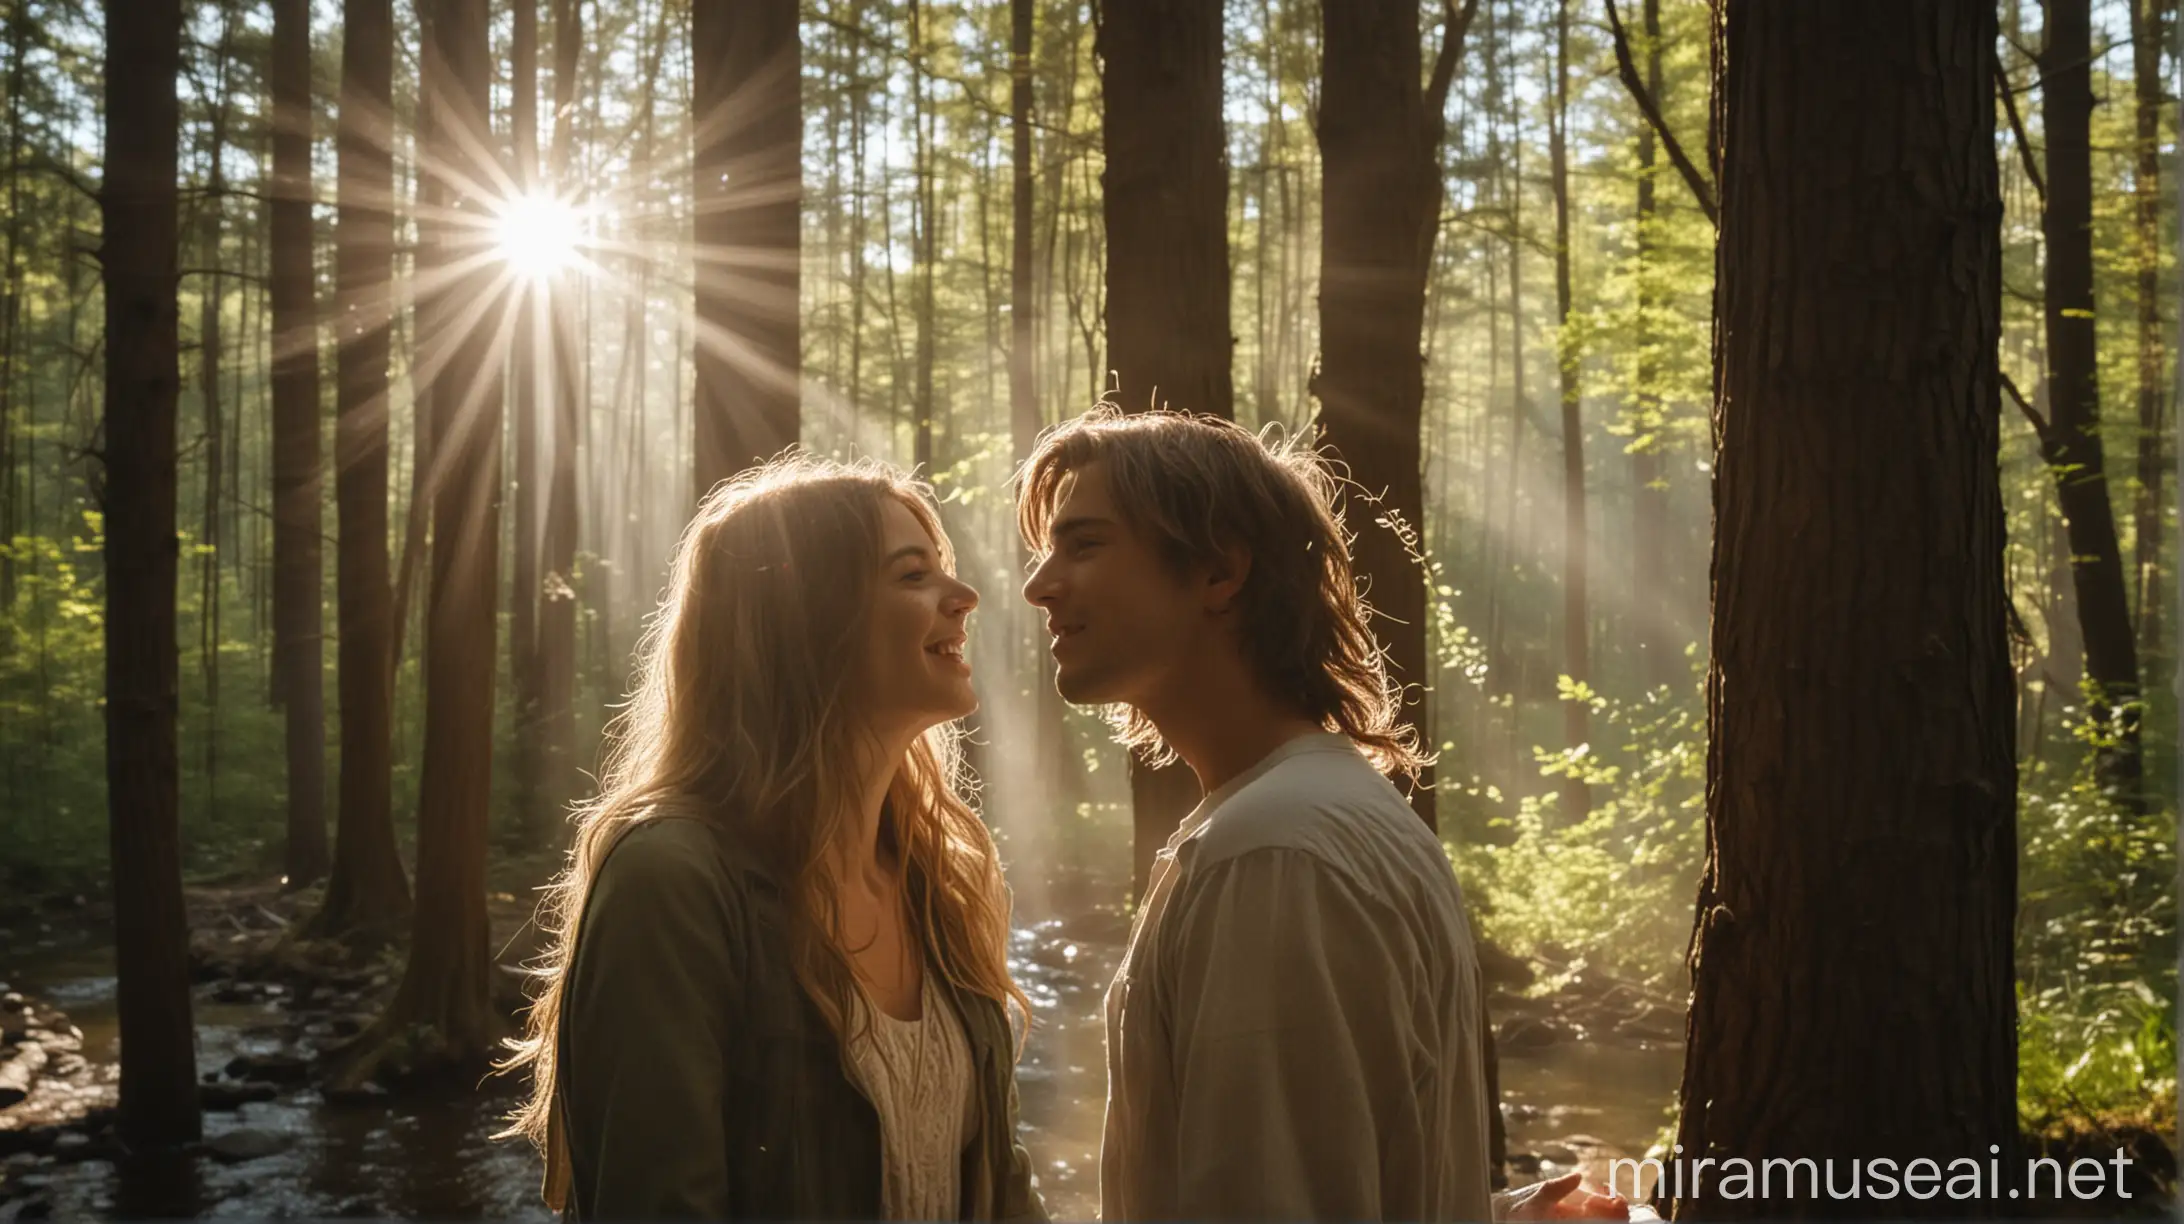  a cute couple close up  in side a dense forest sunbeam is come through  between two trees  a river is flowing besides  